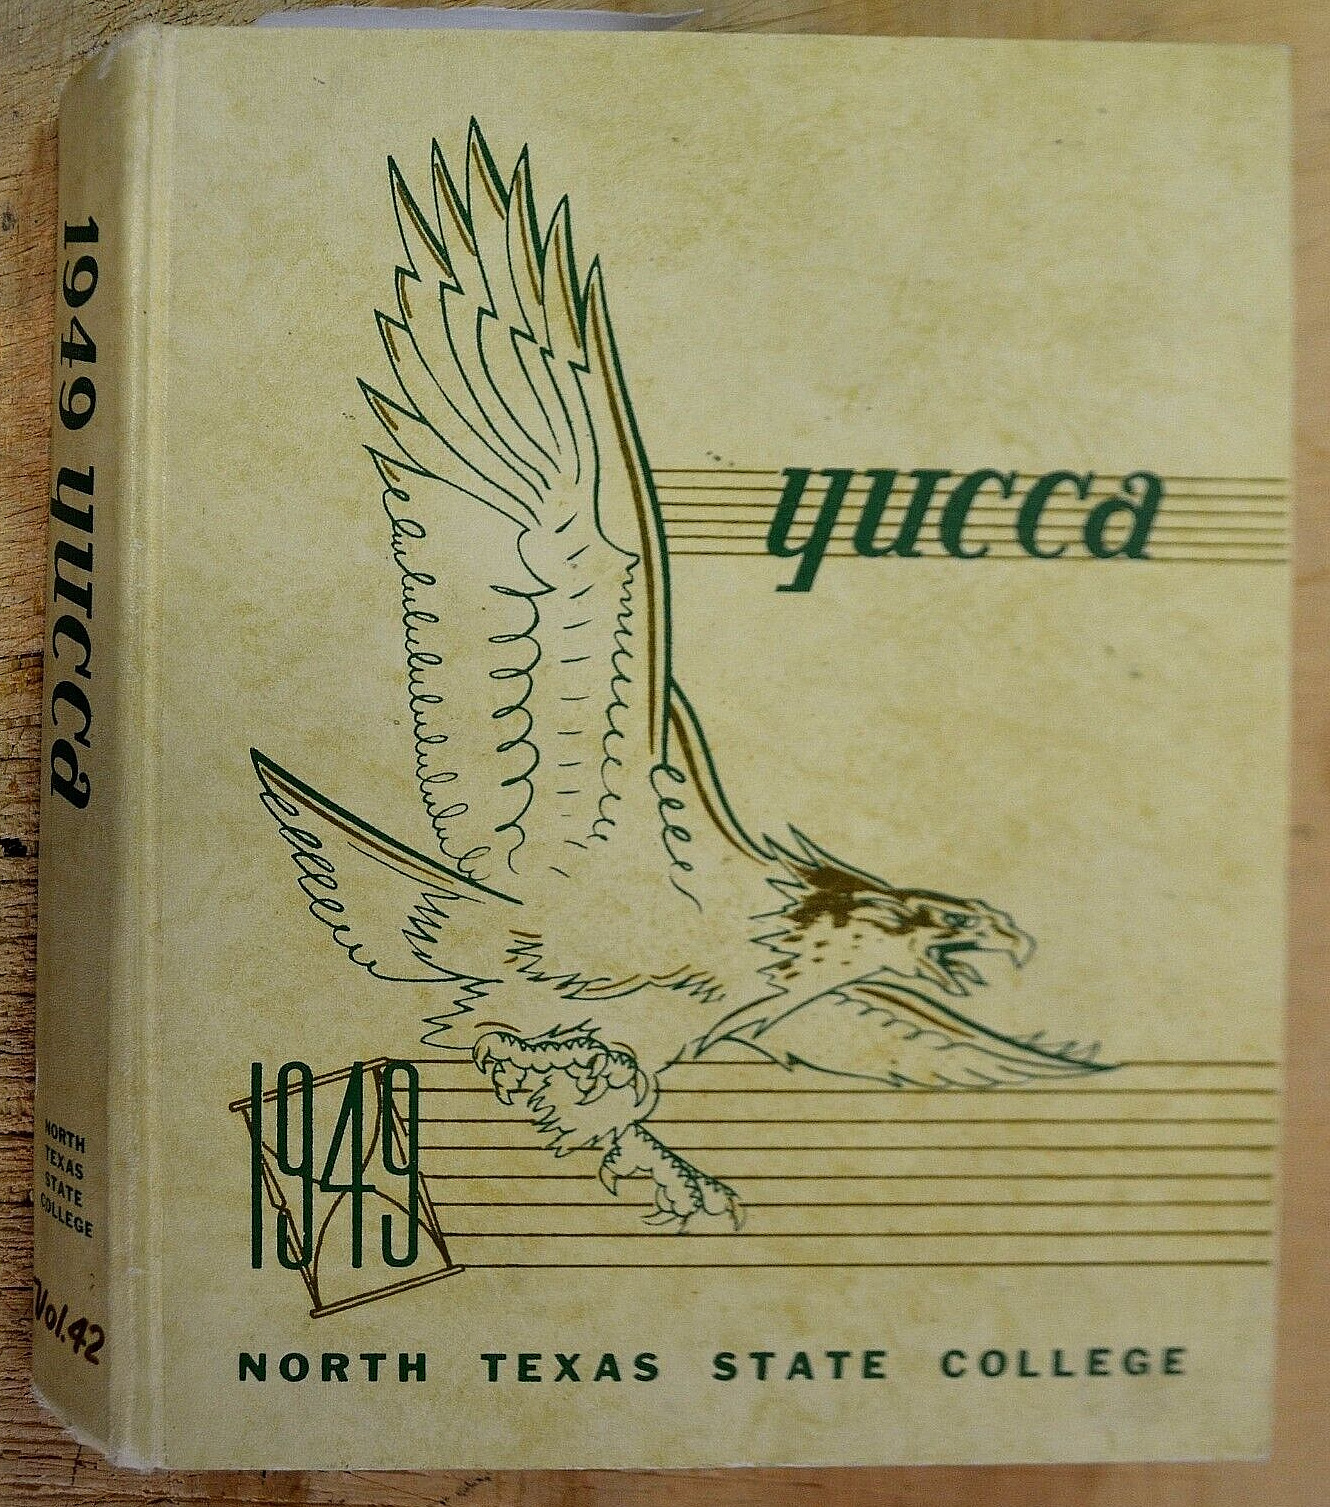 1949 NORTH TEXAS STATE COLLEGE YEARBOOK “YUCCA”